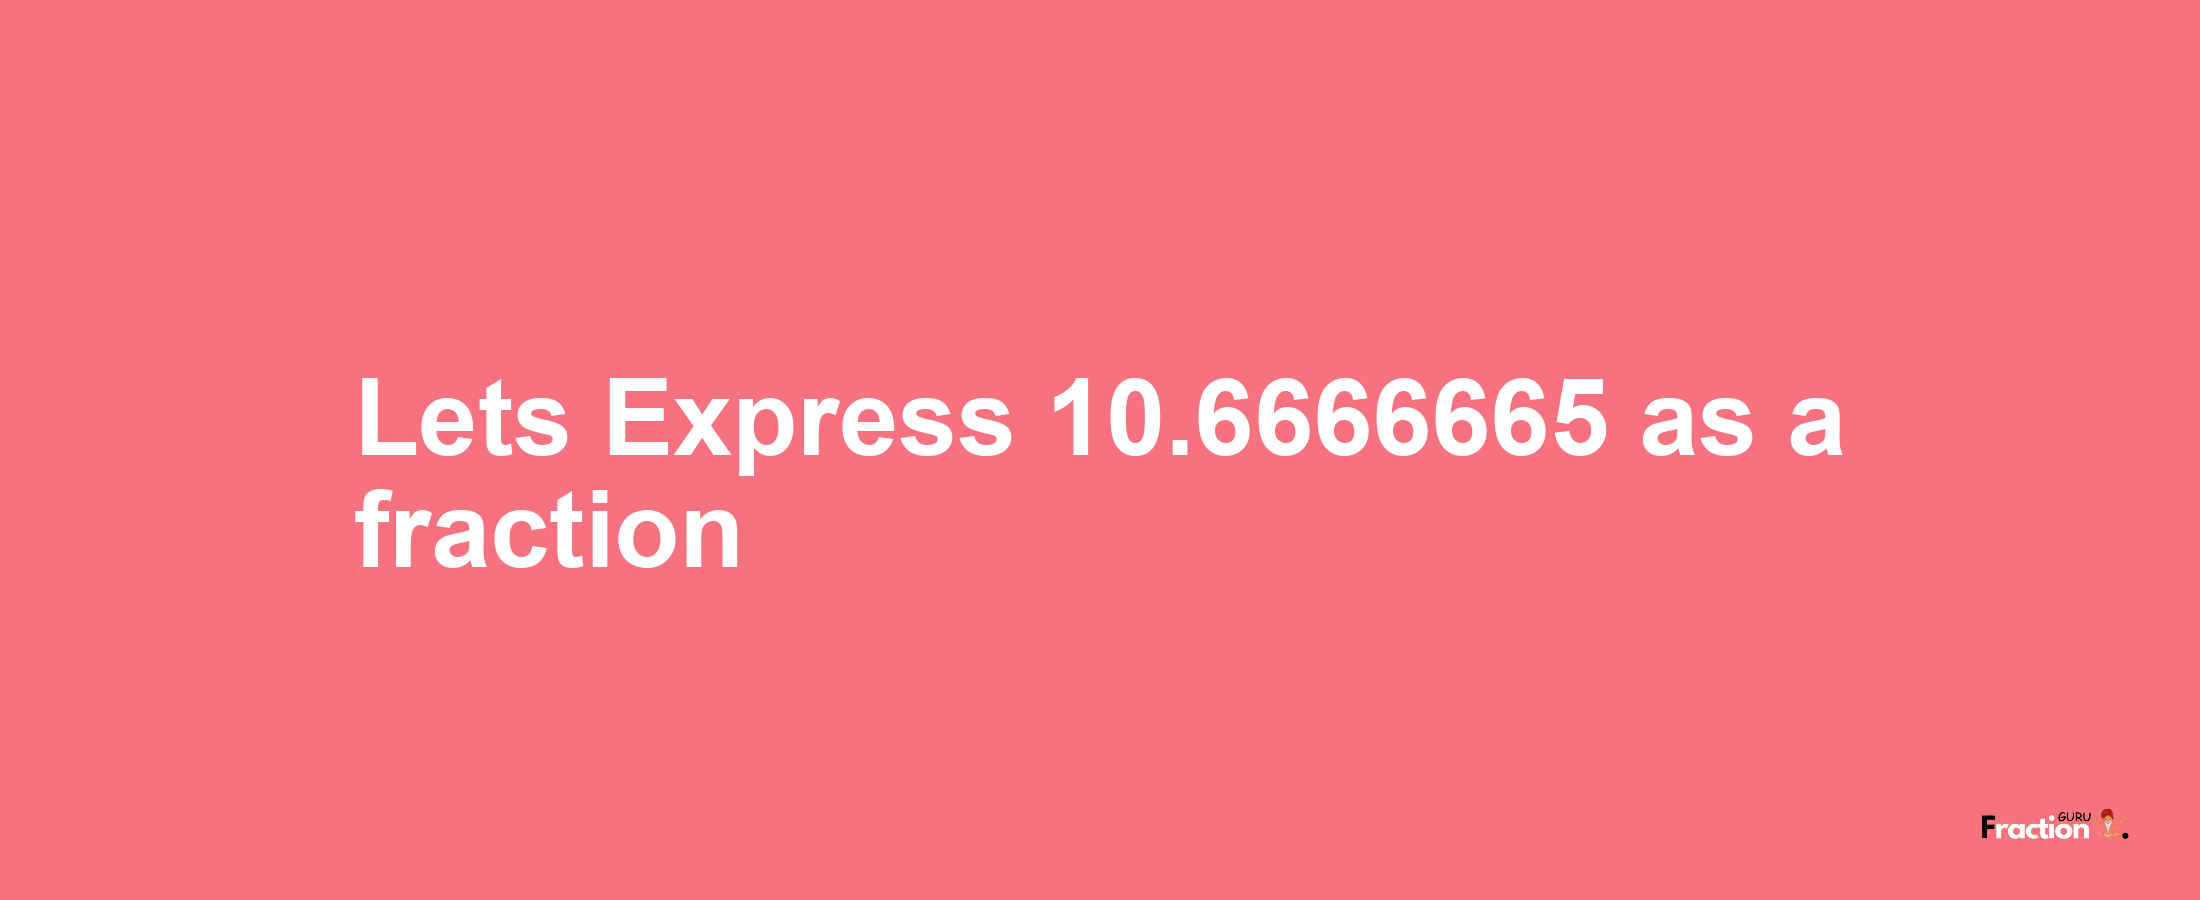 Lets Express 10.6666665 as afraction